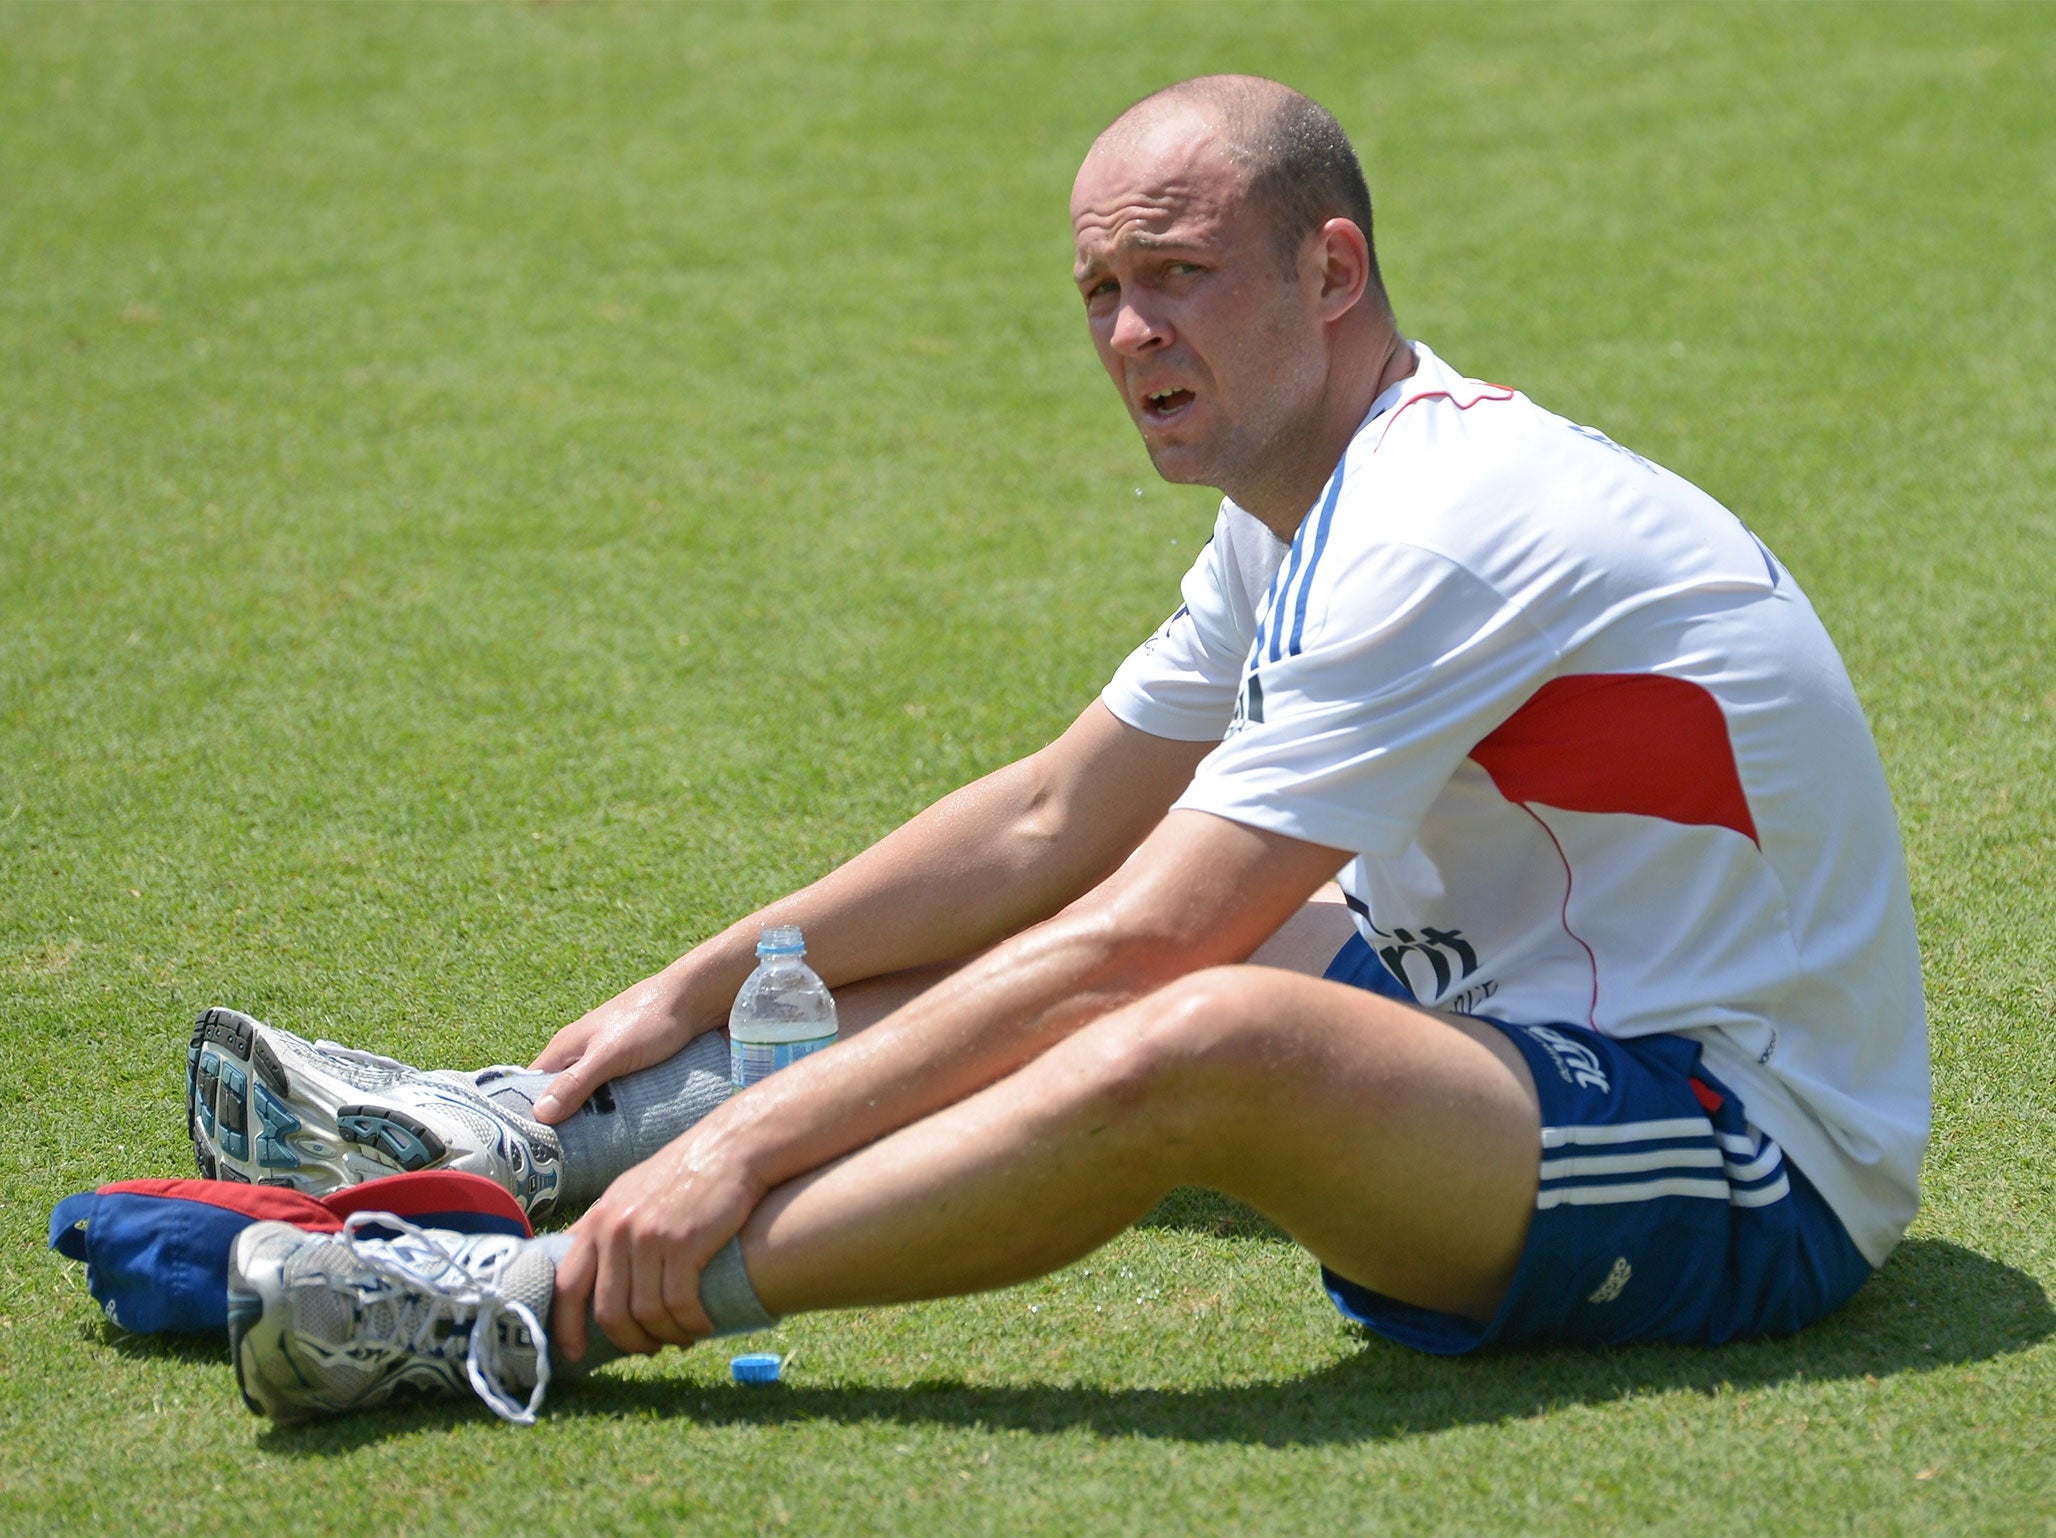 Jonathan Trott struggled with mental health issues that ultimately ended his England career